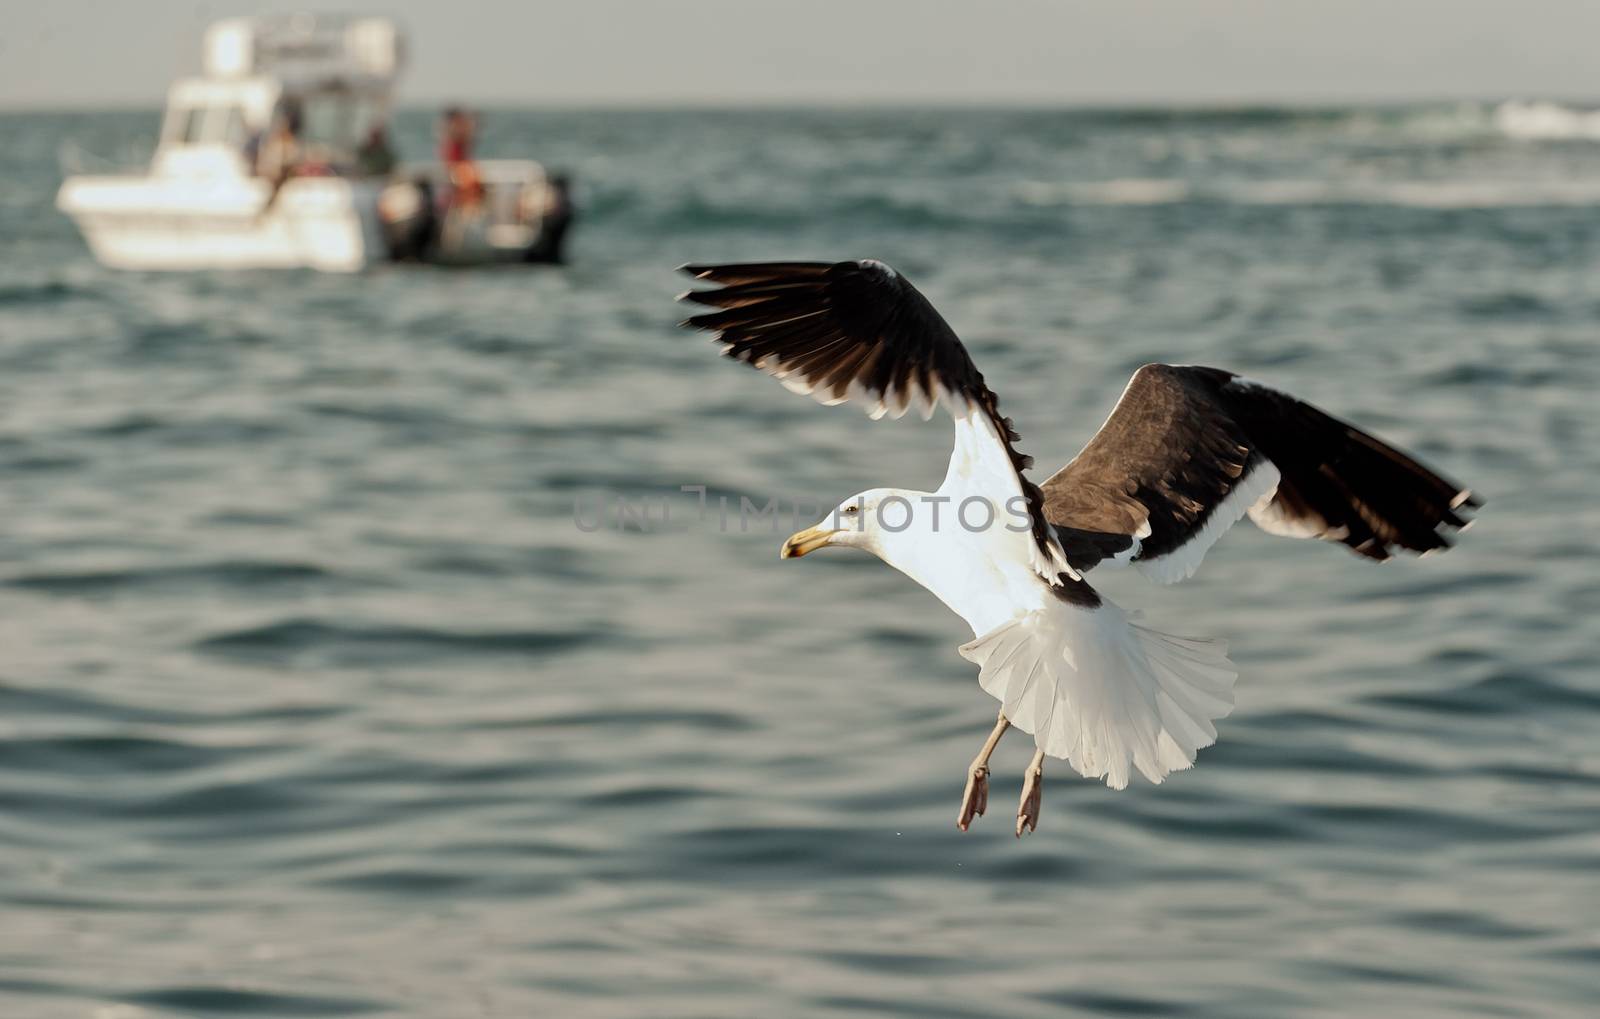 Flying Seagull and the boat in the ocean 